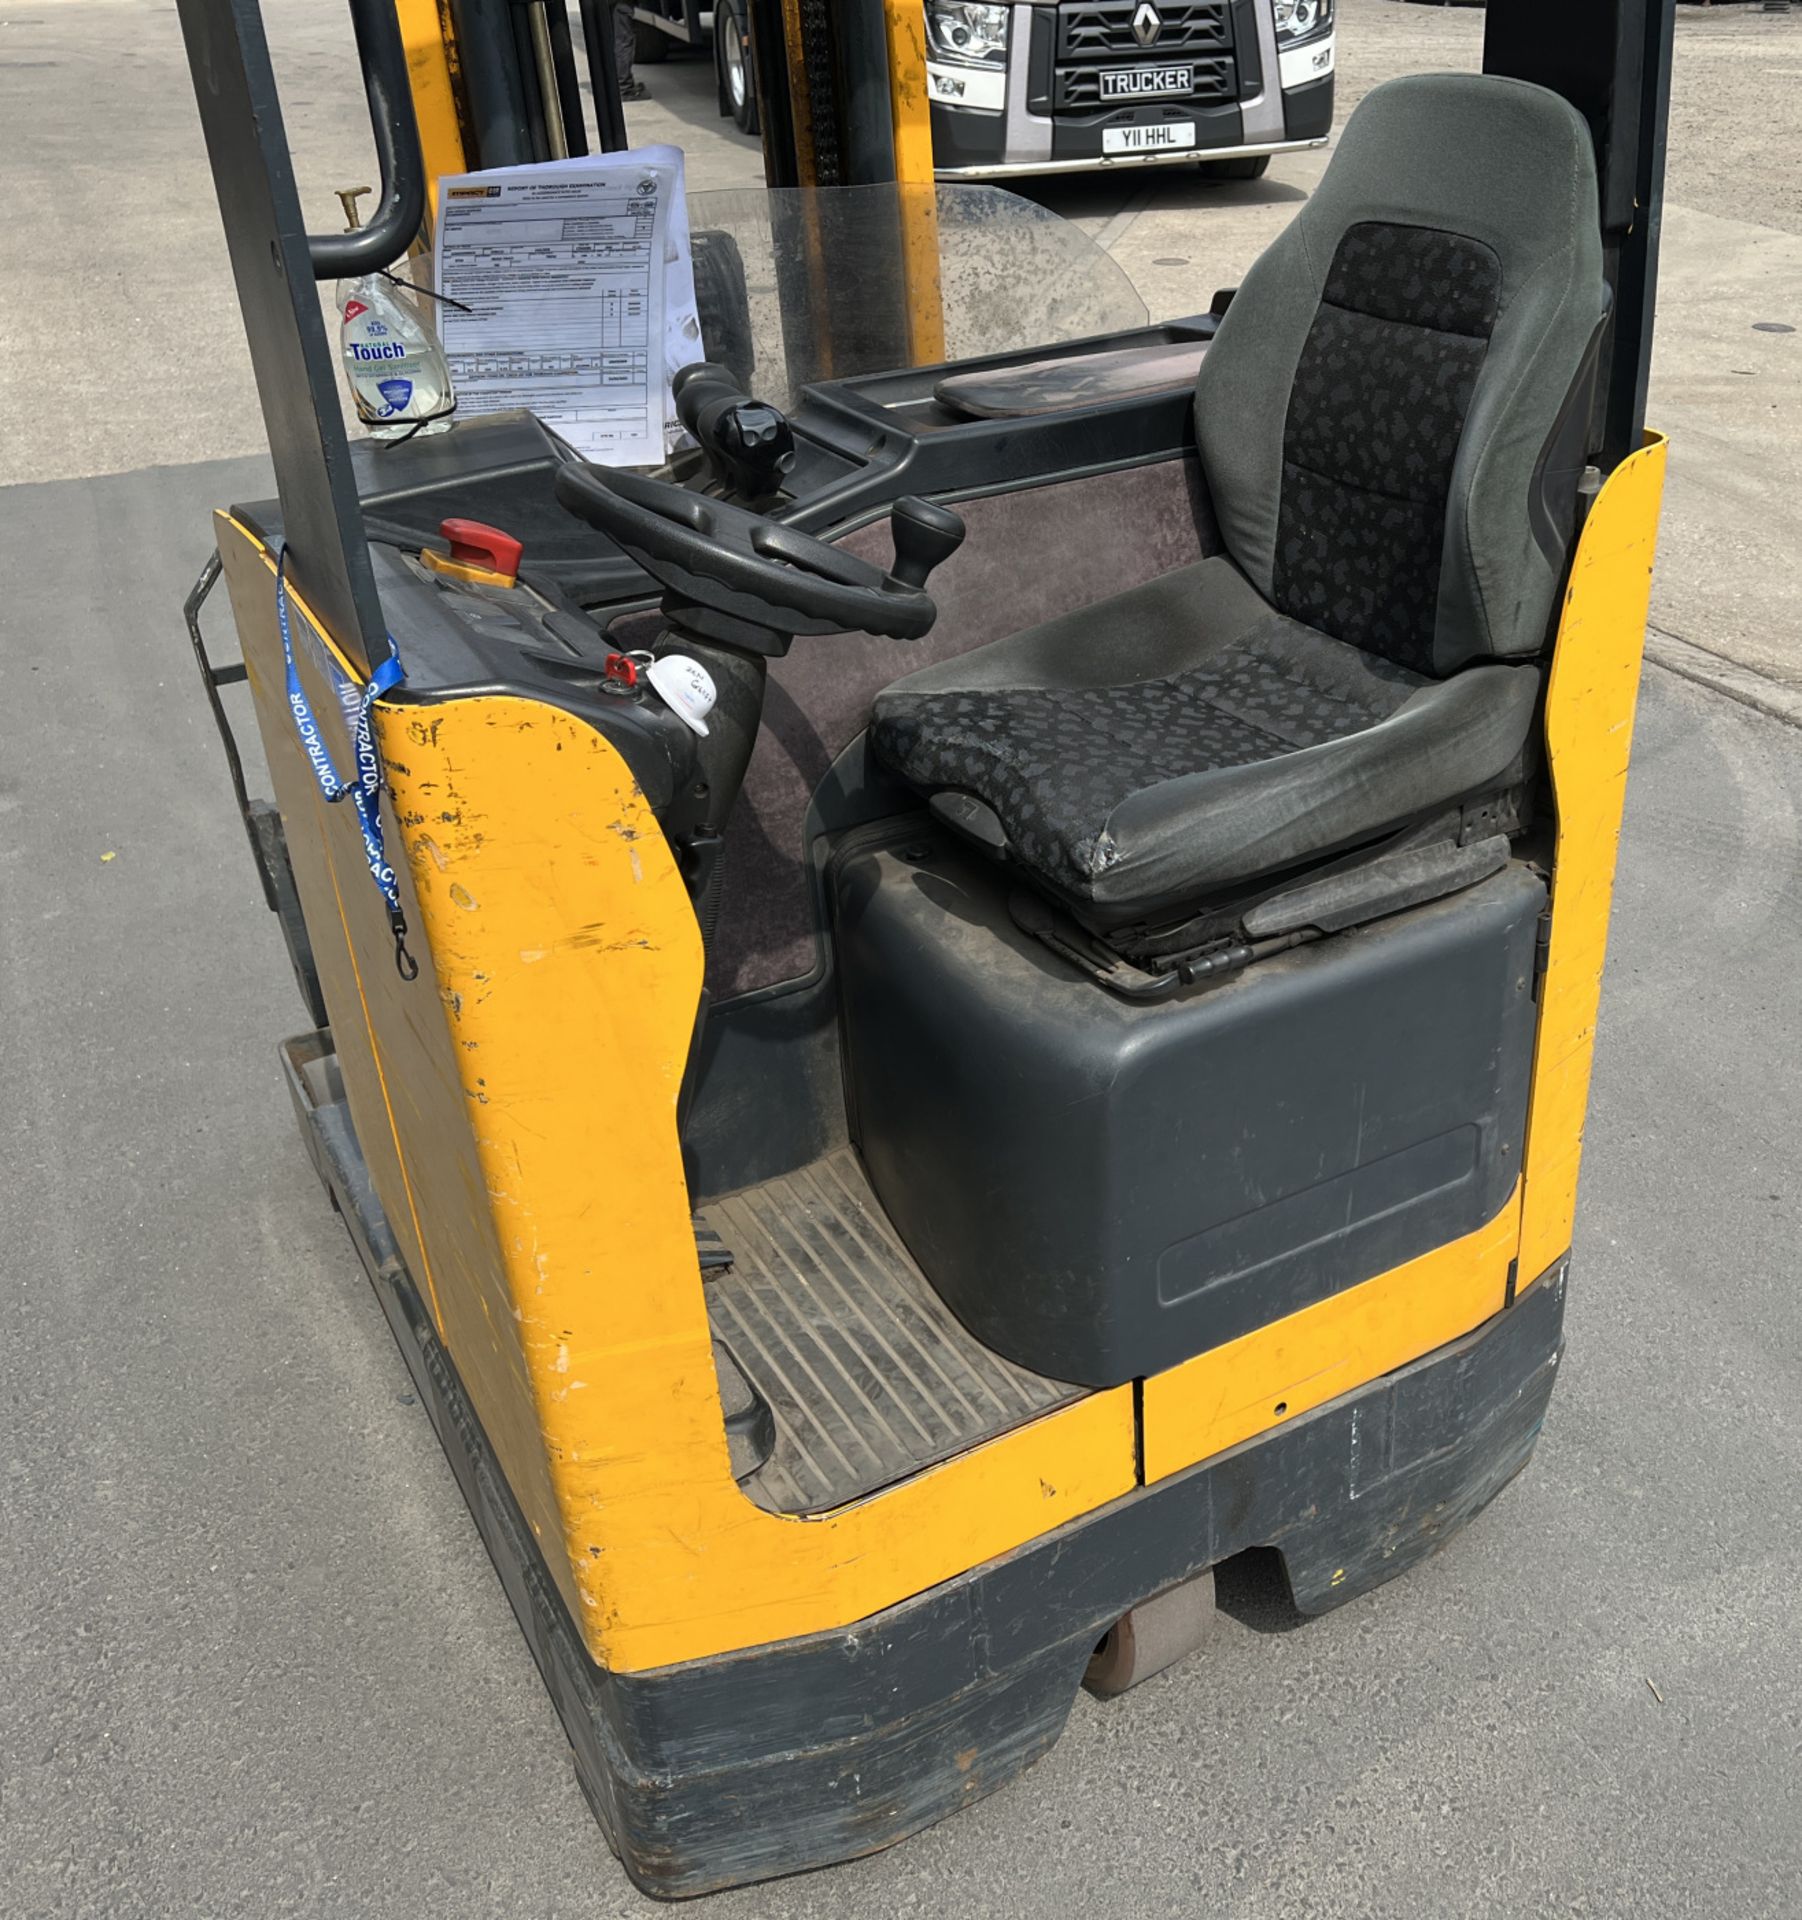 Jungheinrich ETM112 electric reach truck - 8917 hours - SWL 1200kg - with charger - Image 8 of 19